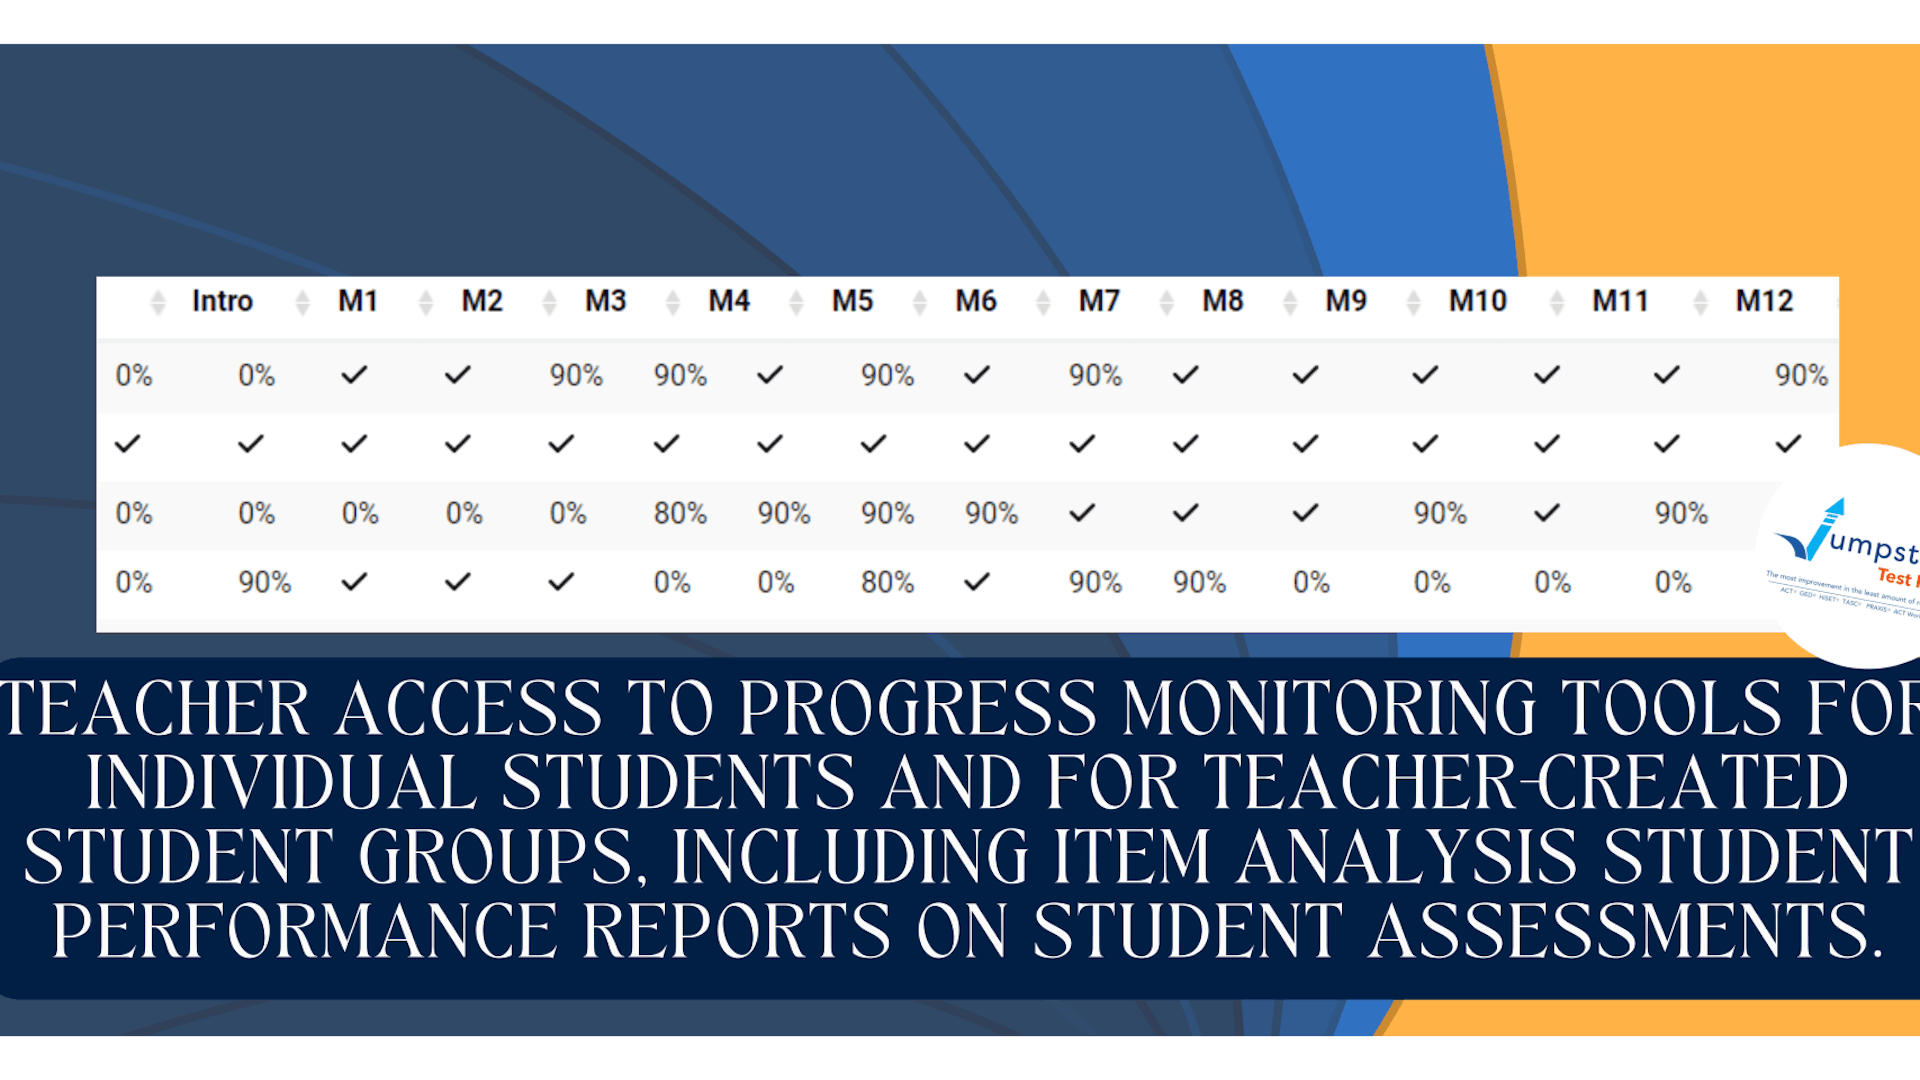 Teacher access to progress monitoring tools for individual students and for teacher-created student groups, including item analysis group performance reports on all assessments